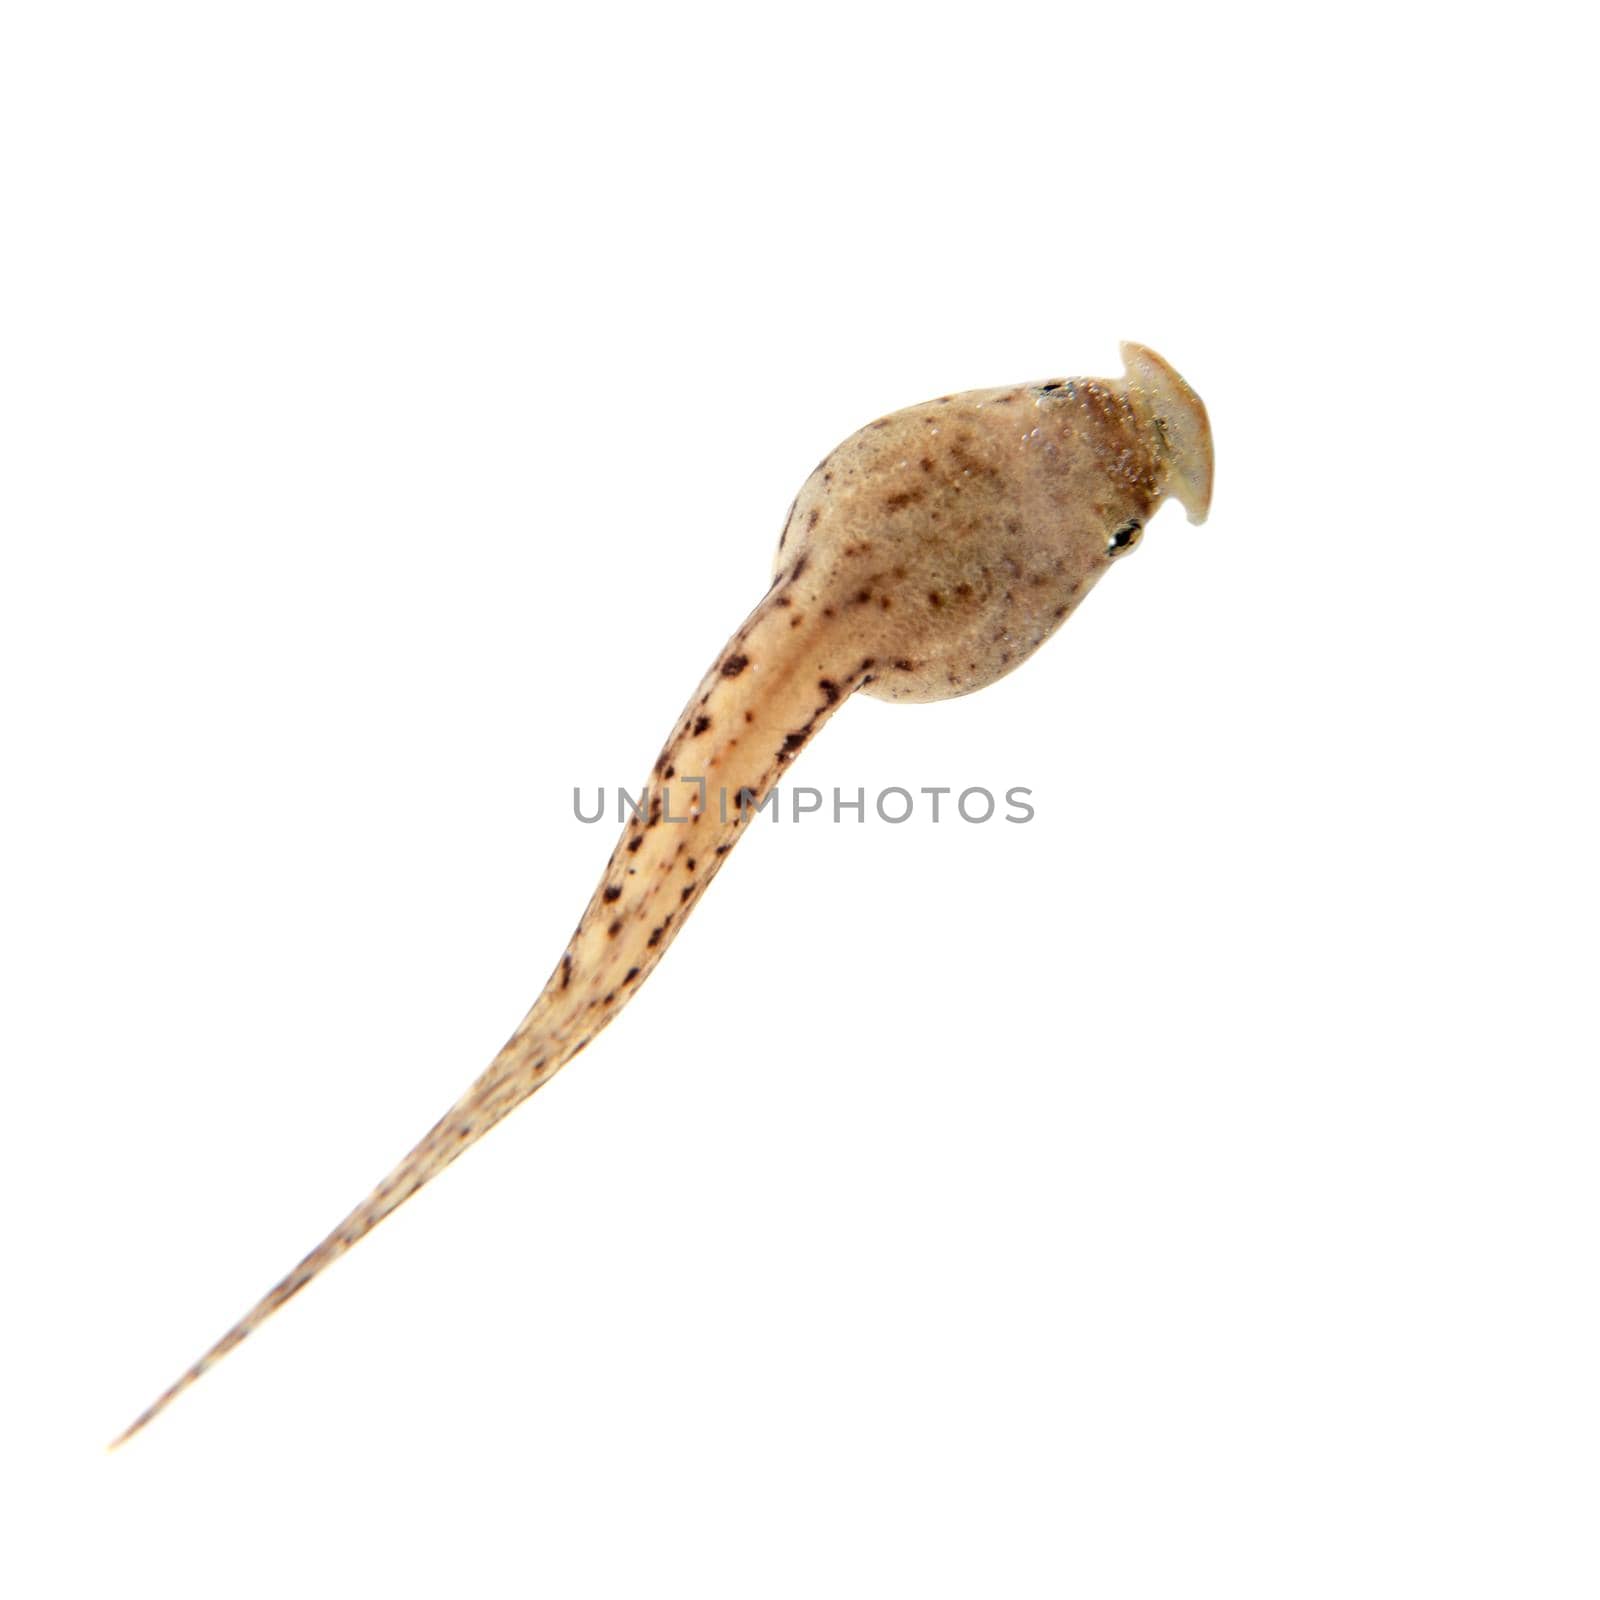 The long-nosed horned frog's tadpole, Megophrys nasuta, growth isolated on white background